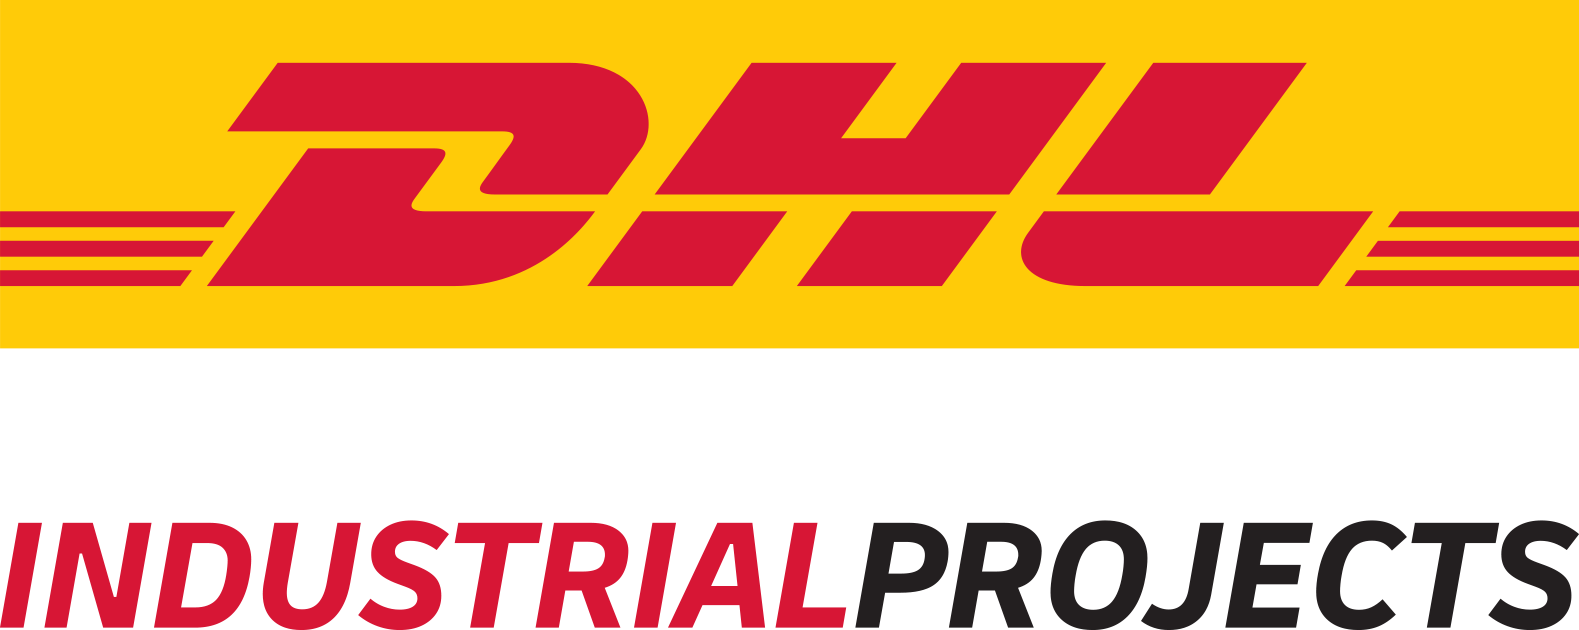 DHL Industrial Projects